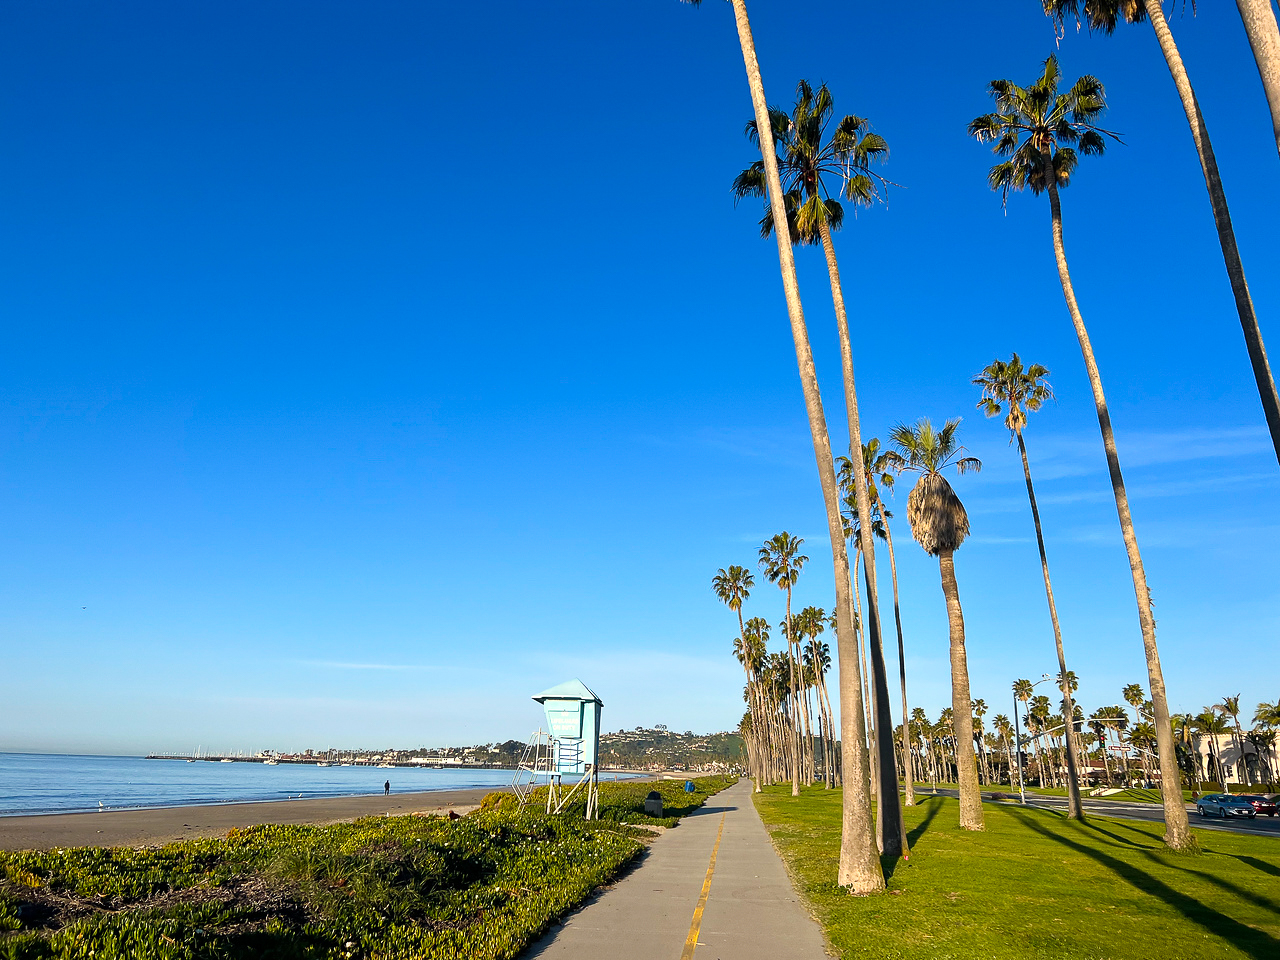 Bike path lined with palm trees along the ocean